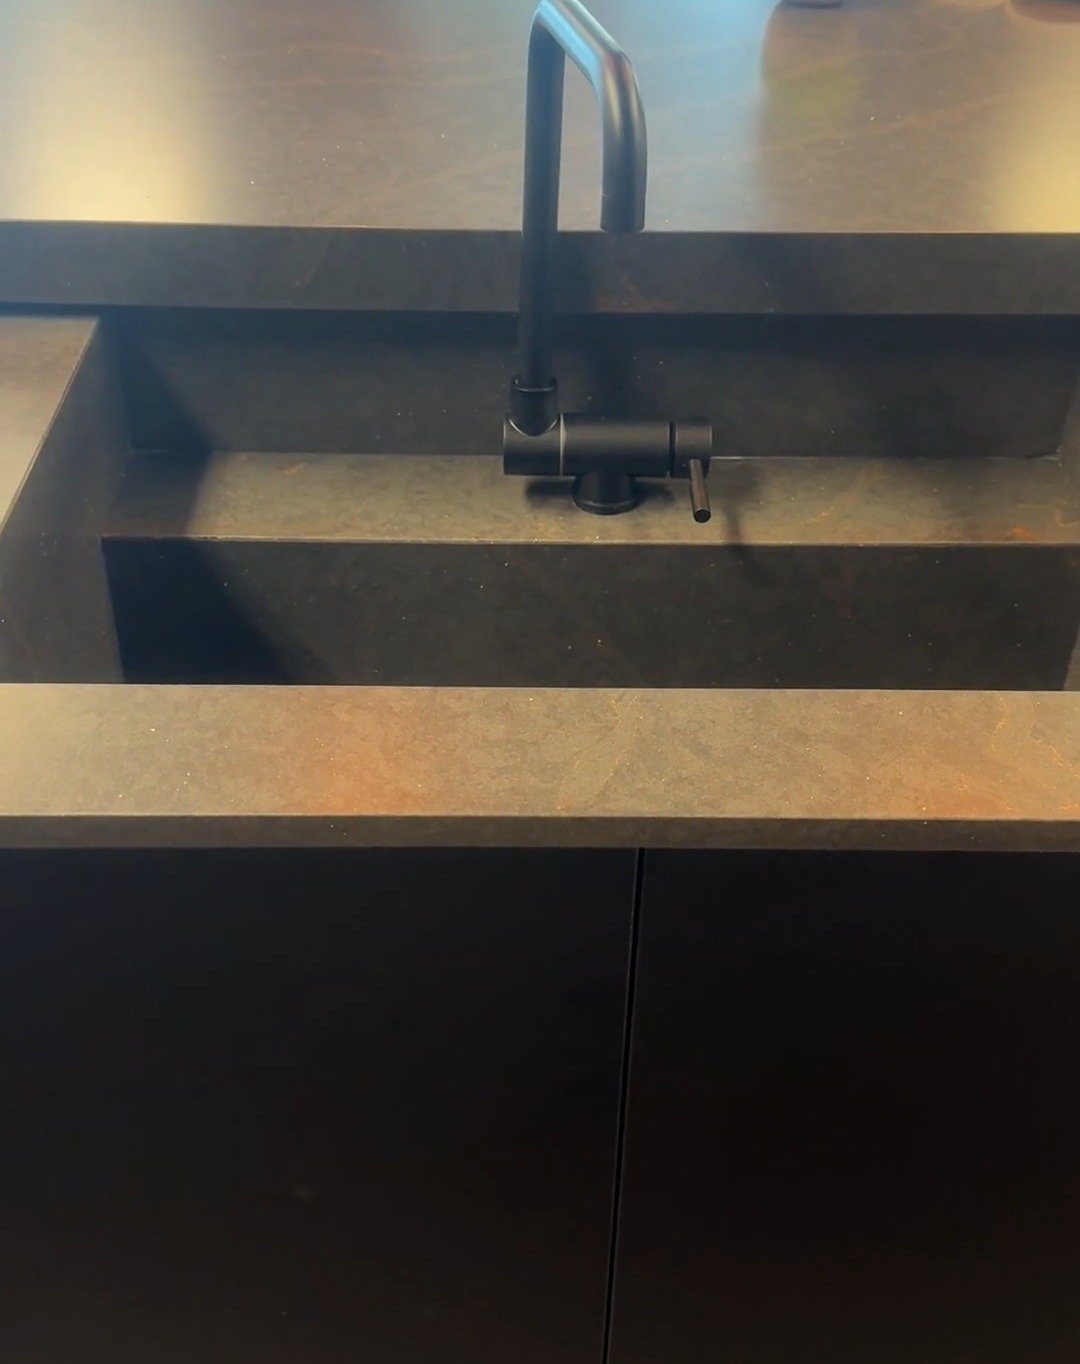 Sliding countertop hides an island sink - Let us wow your kitchen with this amazing feature. You can easily slide it to have a seating section when you open up the sink section. A collapsible faucet folds down to allow the countertop to slide over th